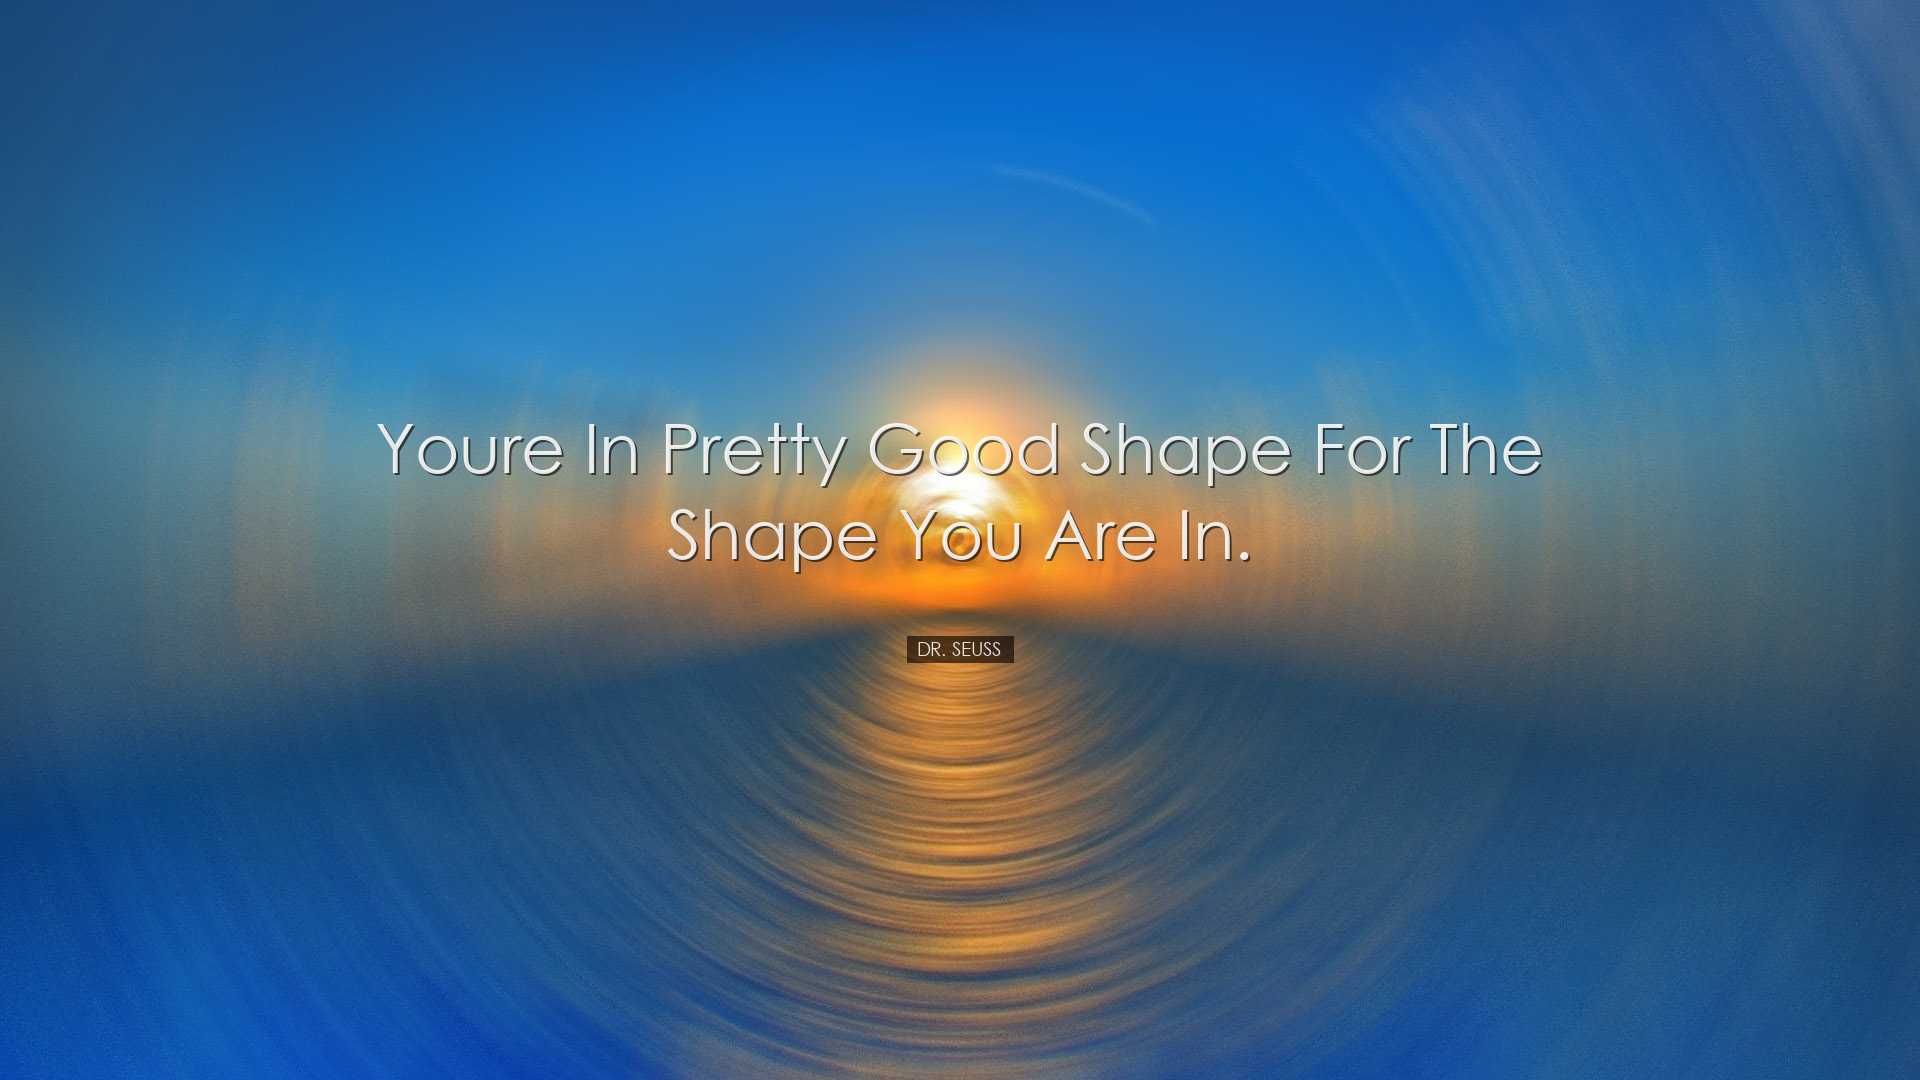 Youre in pretty good shape for the shape you are in. - Dr. Seuss